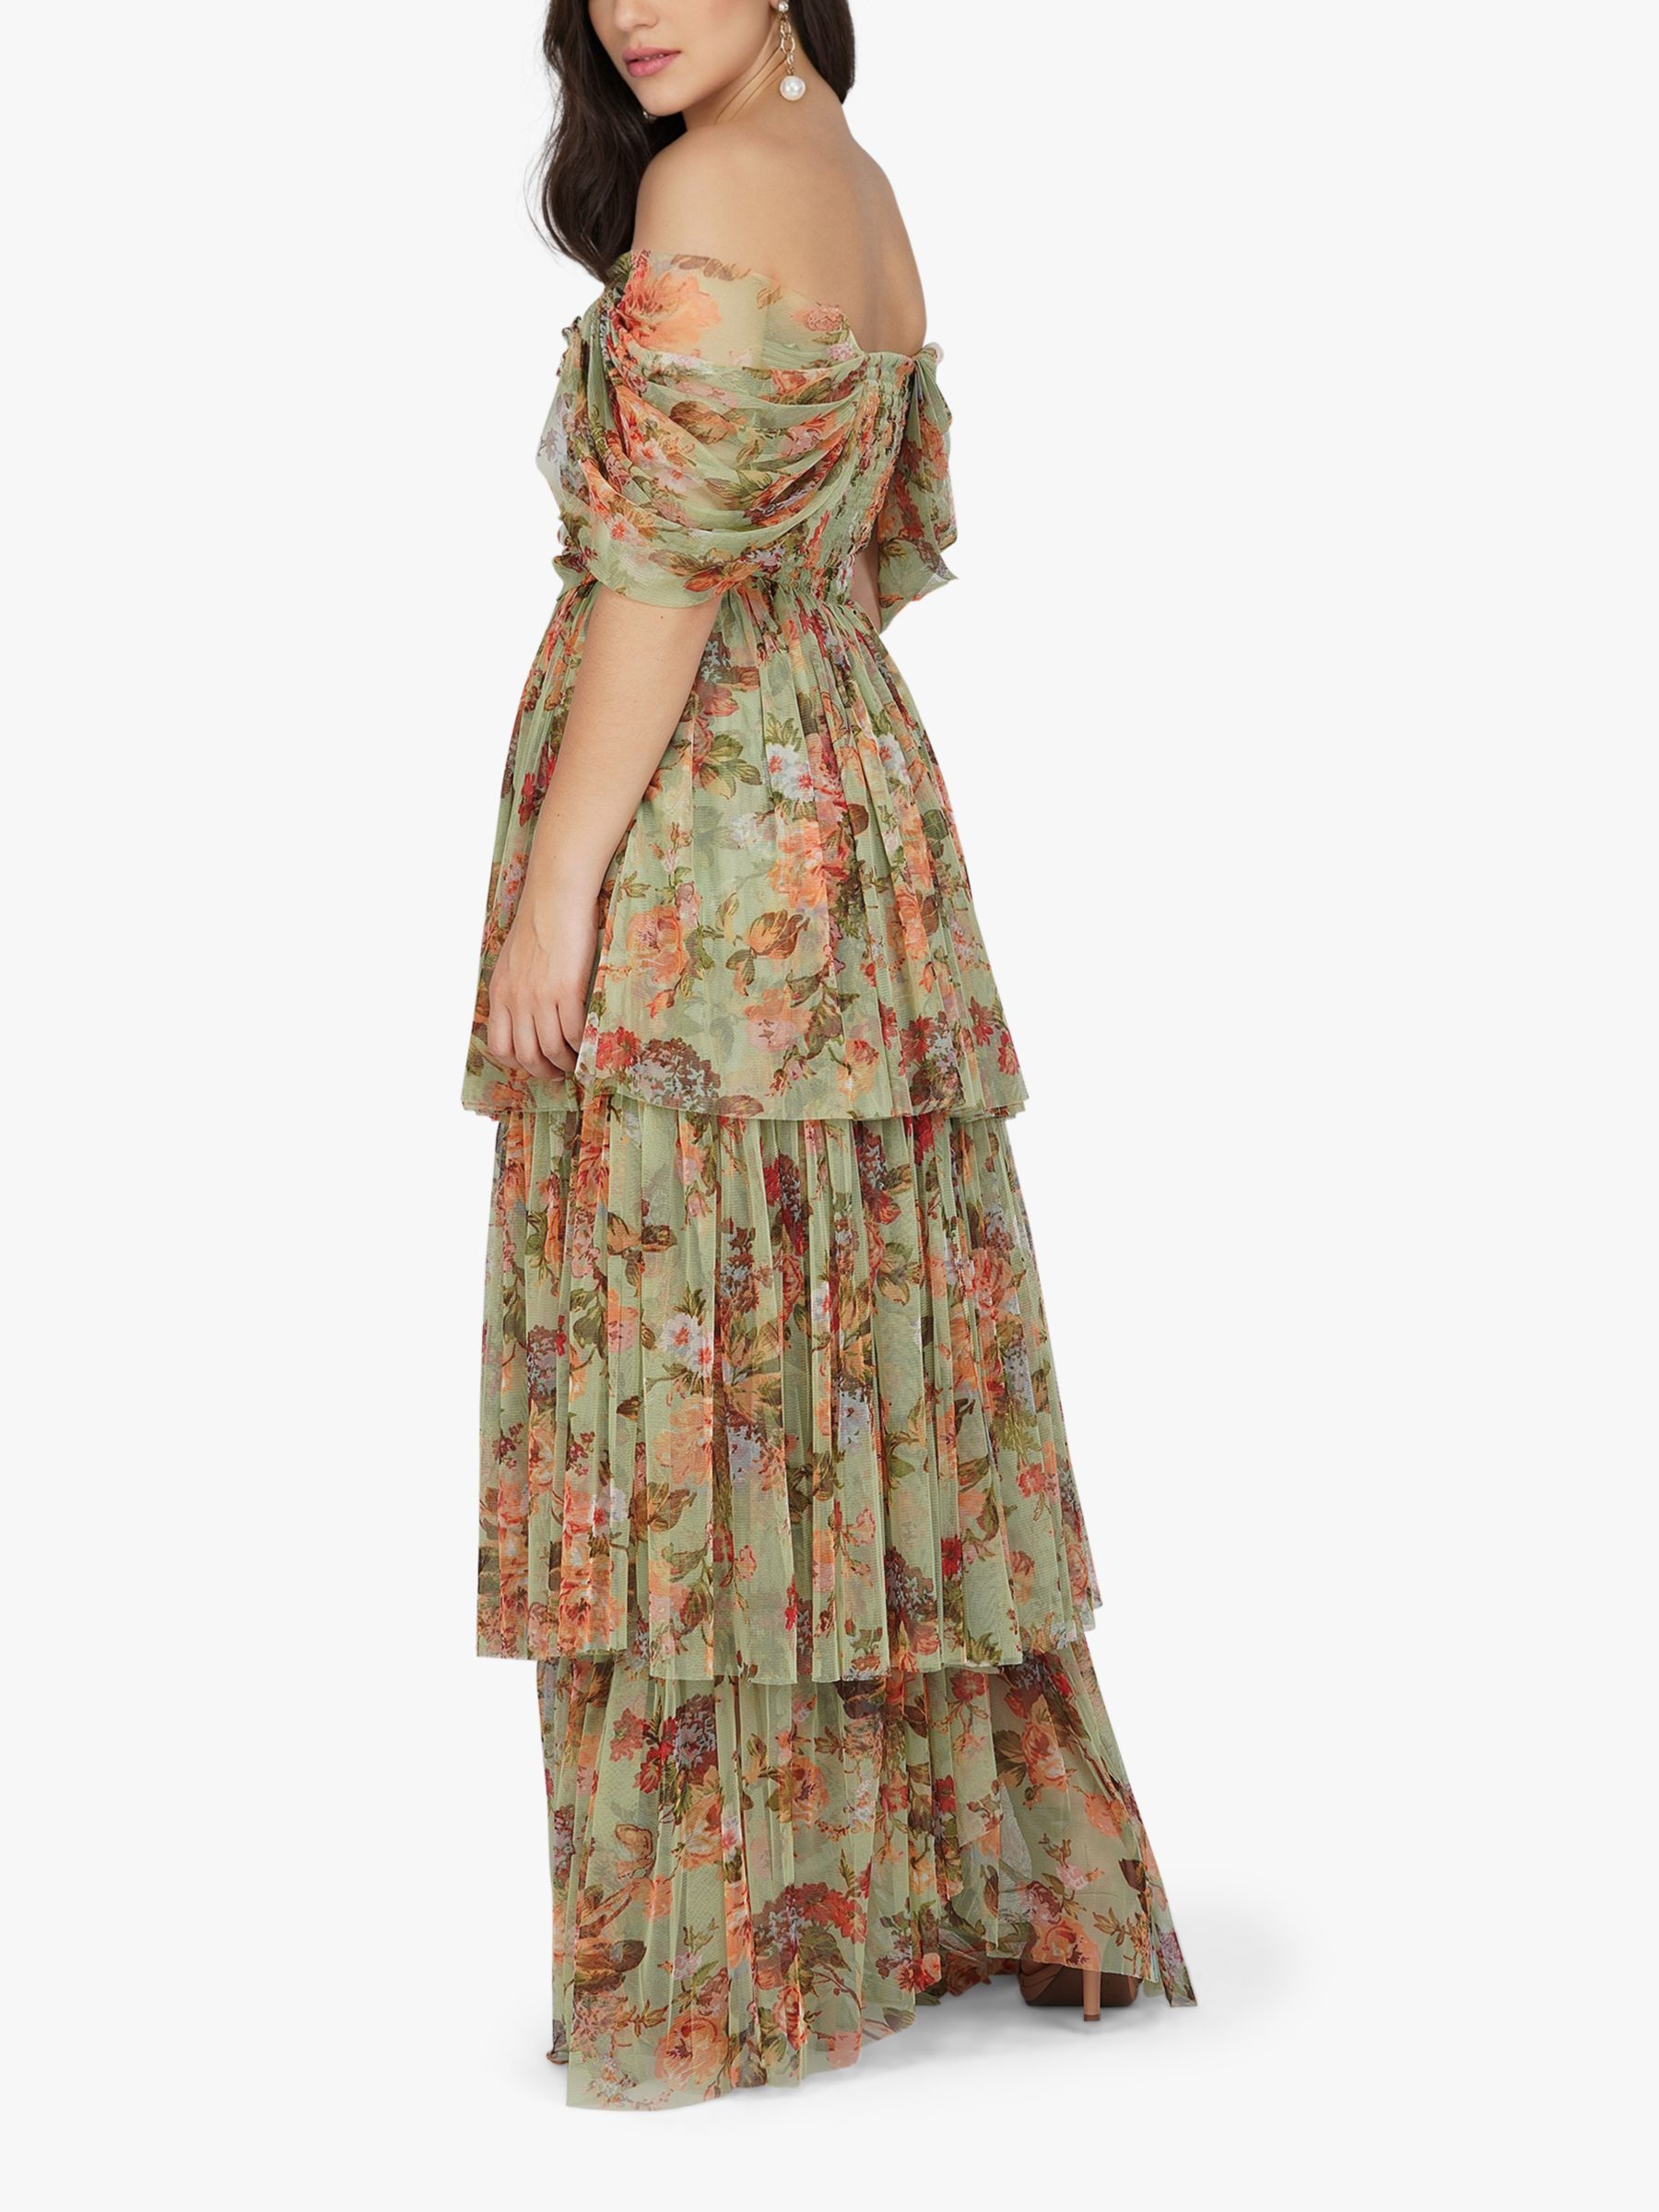 Buy Lace & Beads Sydney Maxi Dress, Green/Multi Online at johnlewis.com